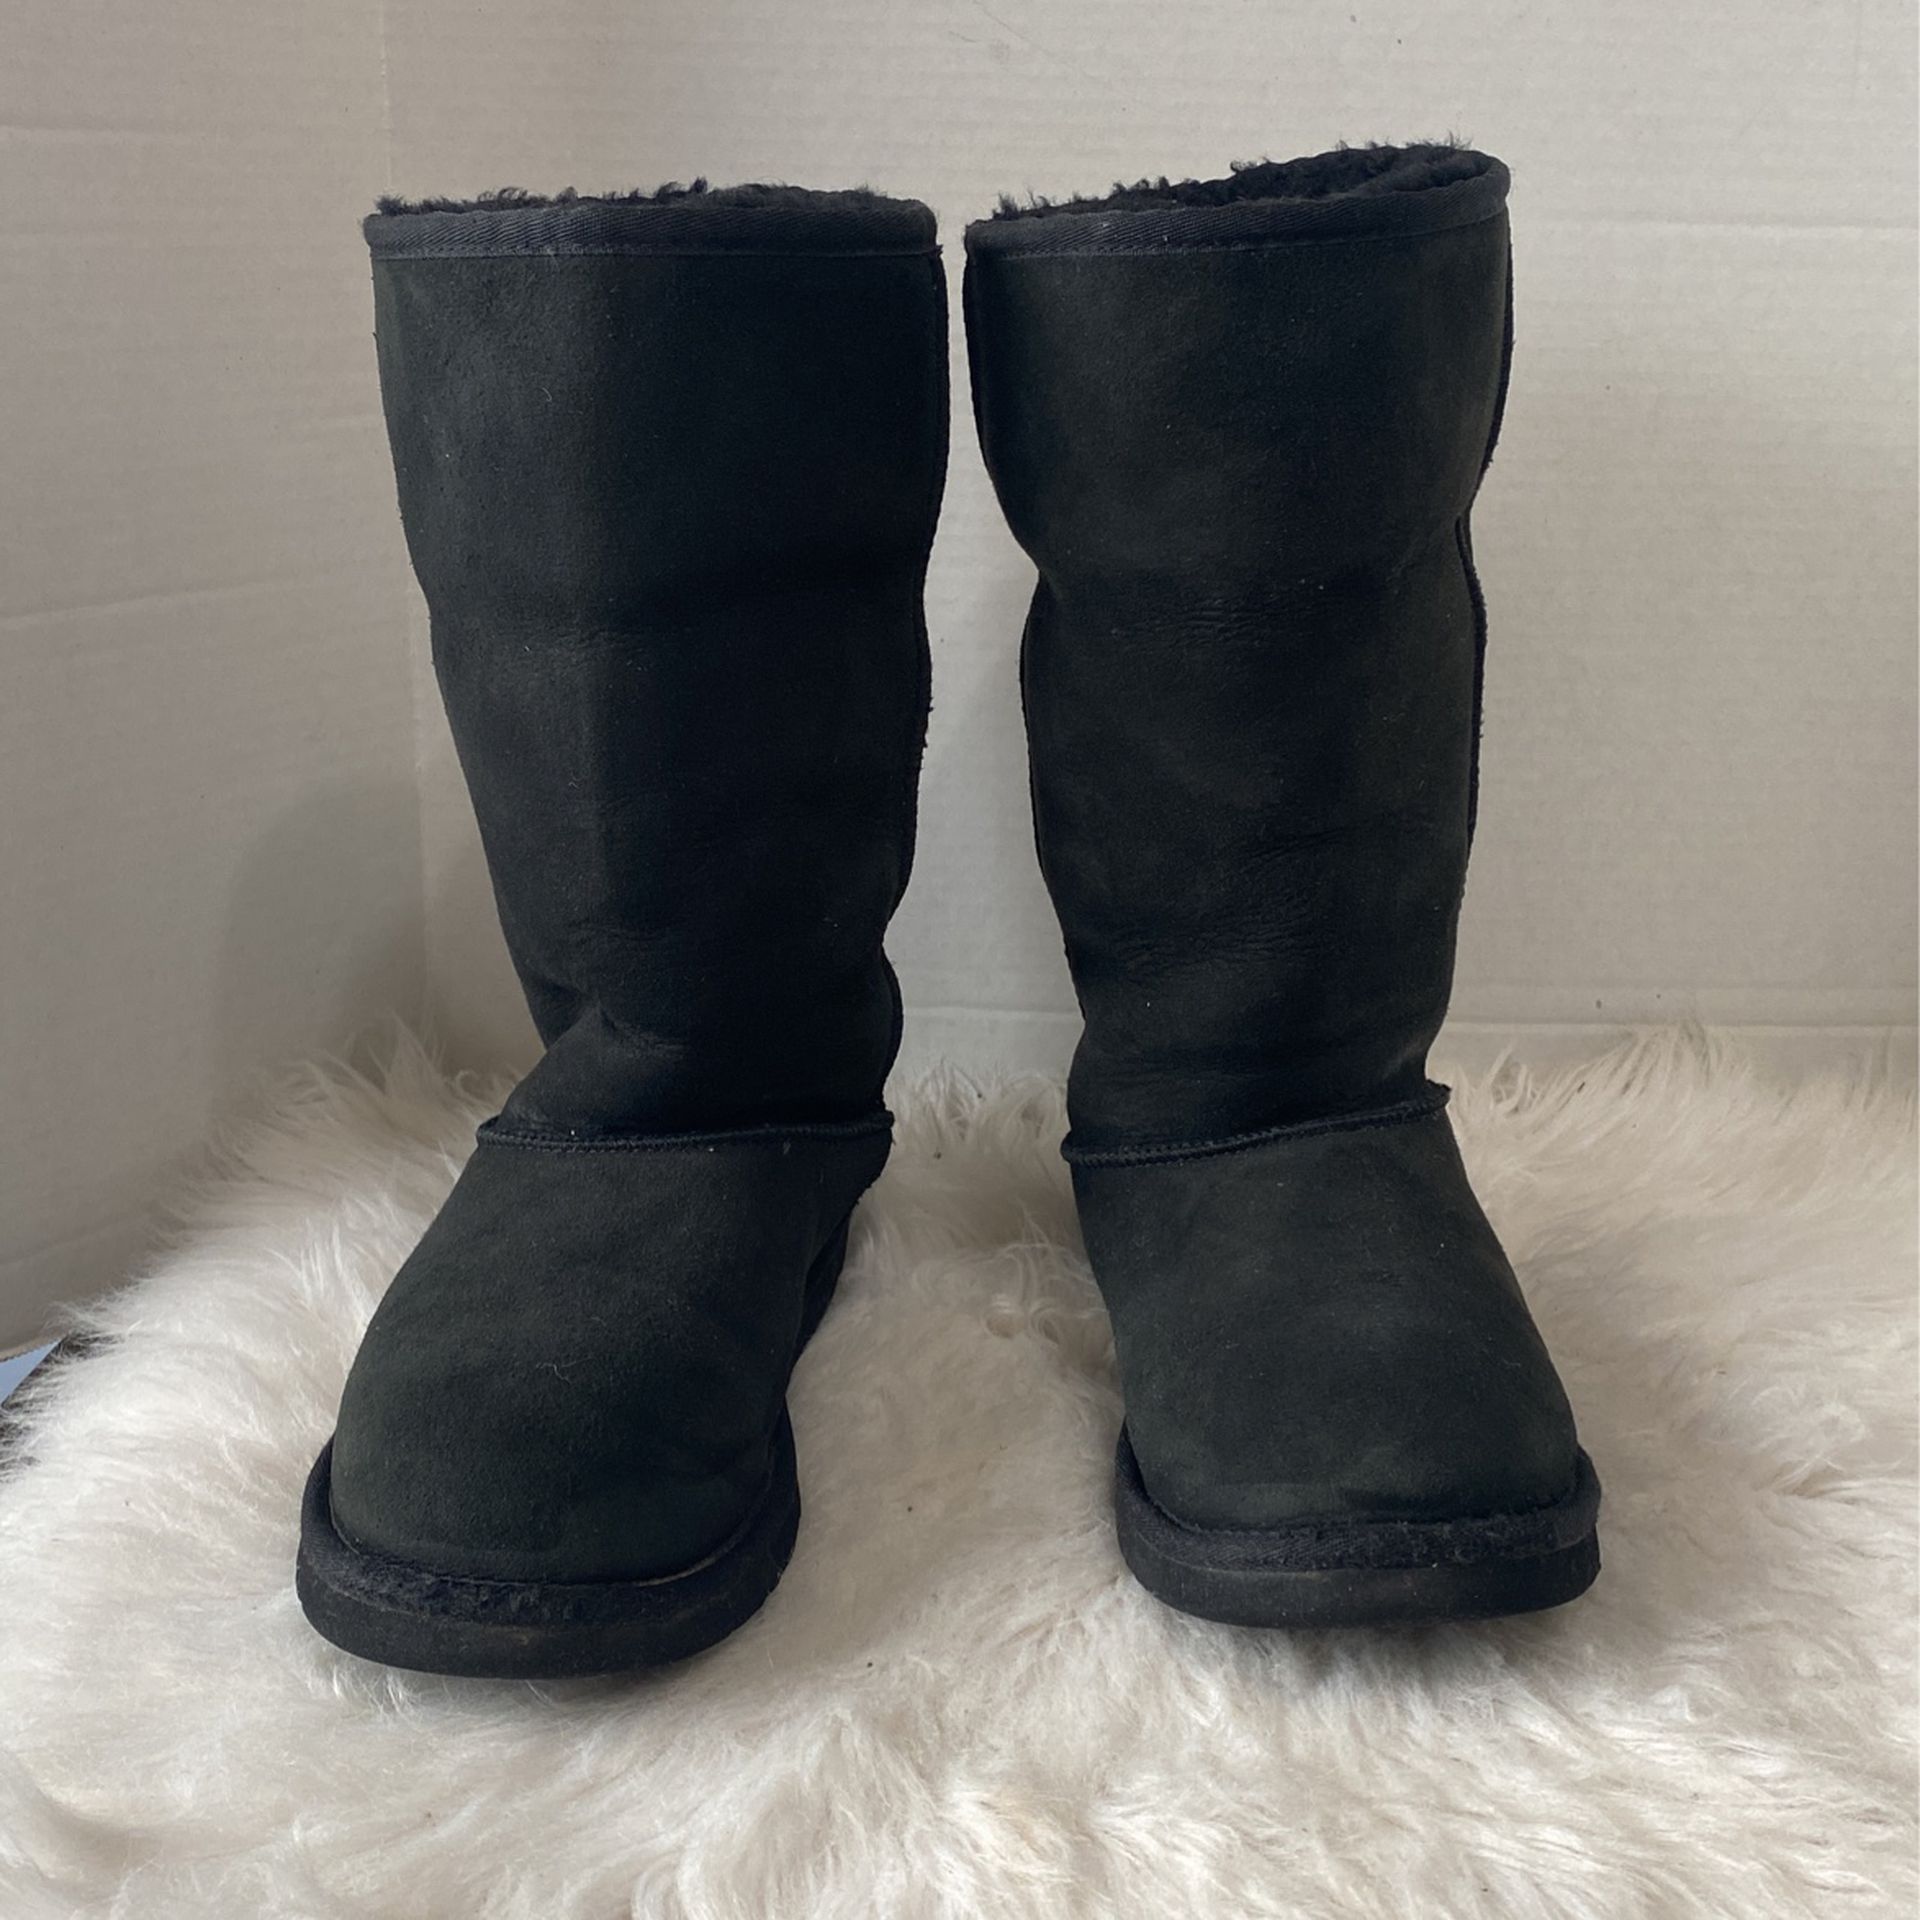 Ugg Boots Size 6